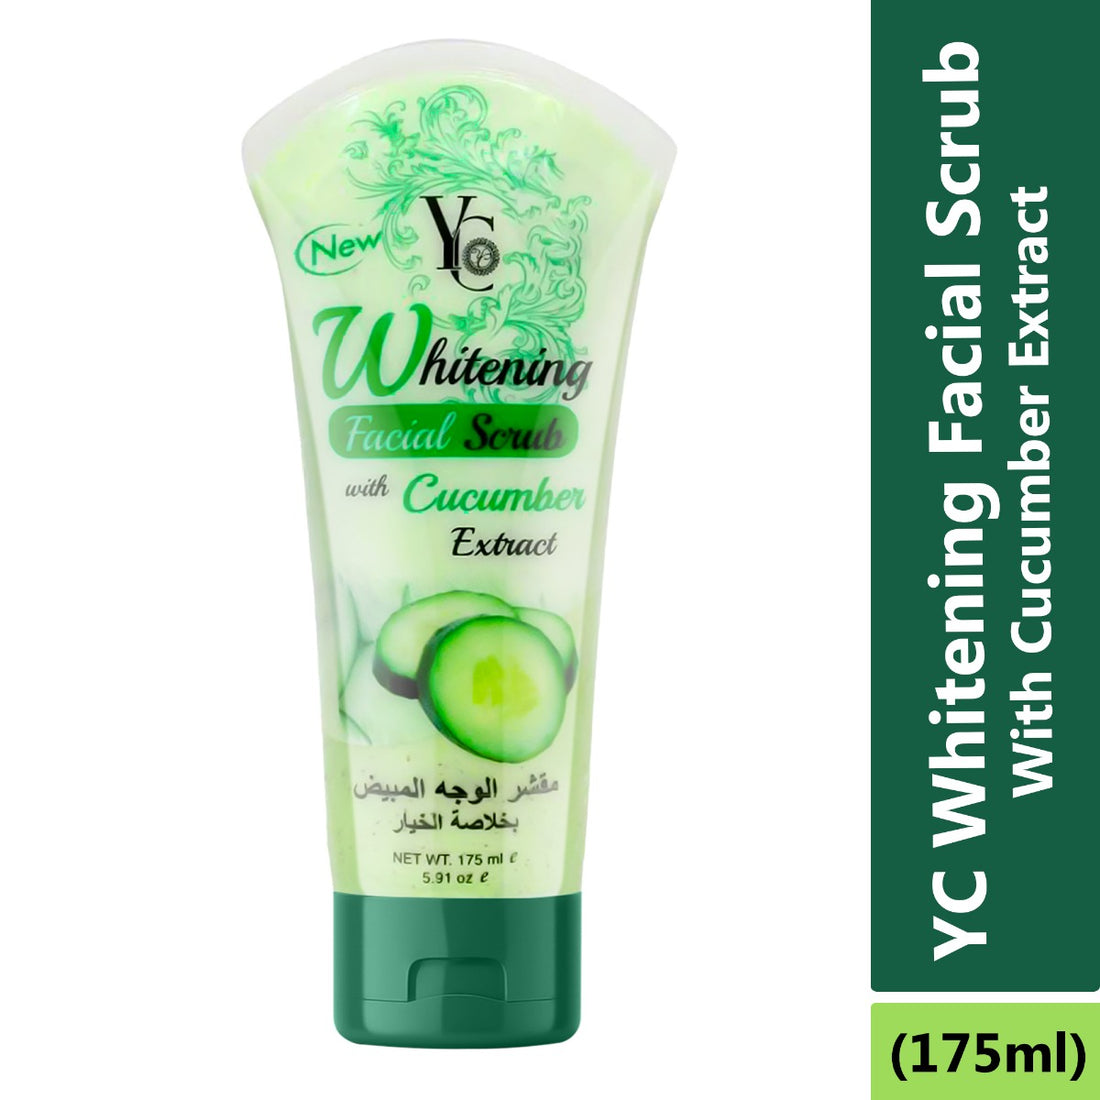 YC Whitening Facial Scrub With Cucumber Extract (175ml)